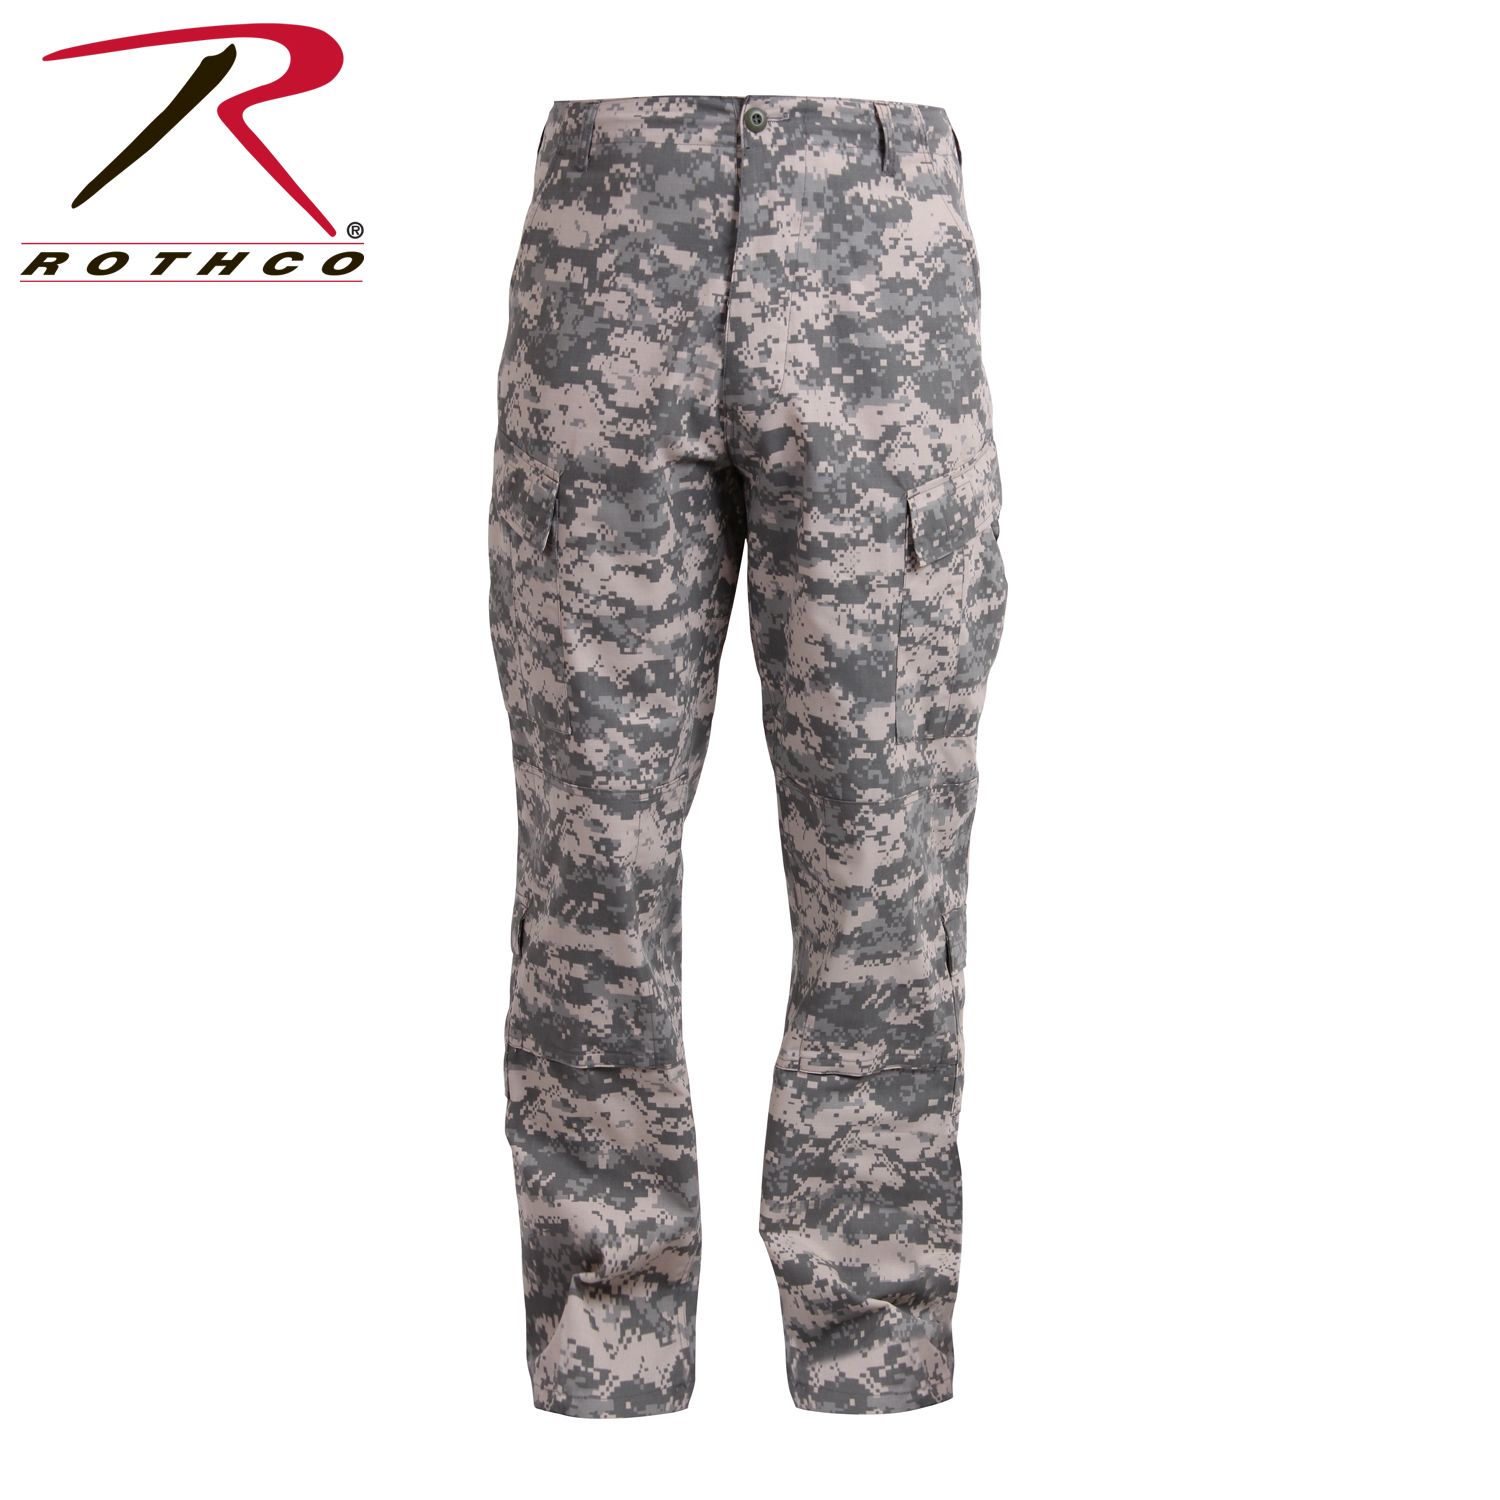 black and white army fatigue pants